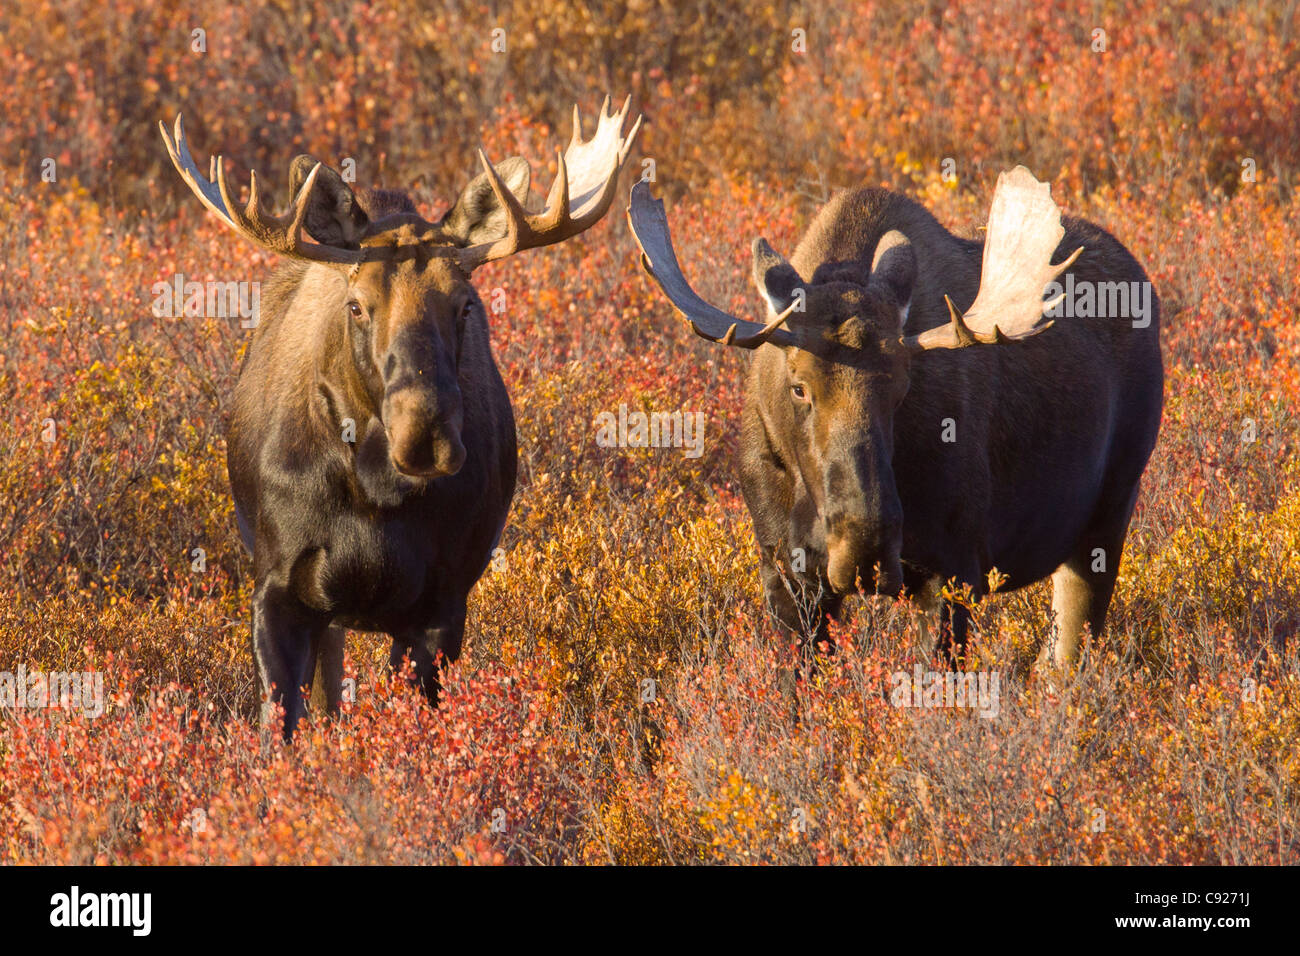 Two adult bull moose stand side by side in Fall colored foliage in early morning, Denali National Park and Preserve, Alaska Stock Photo